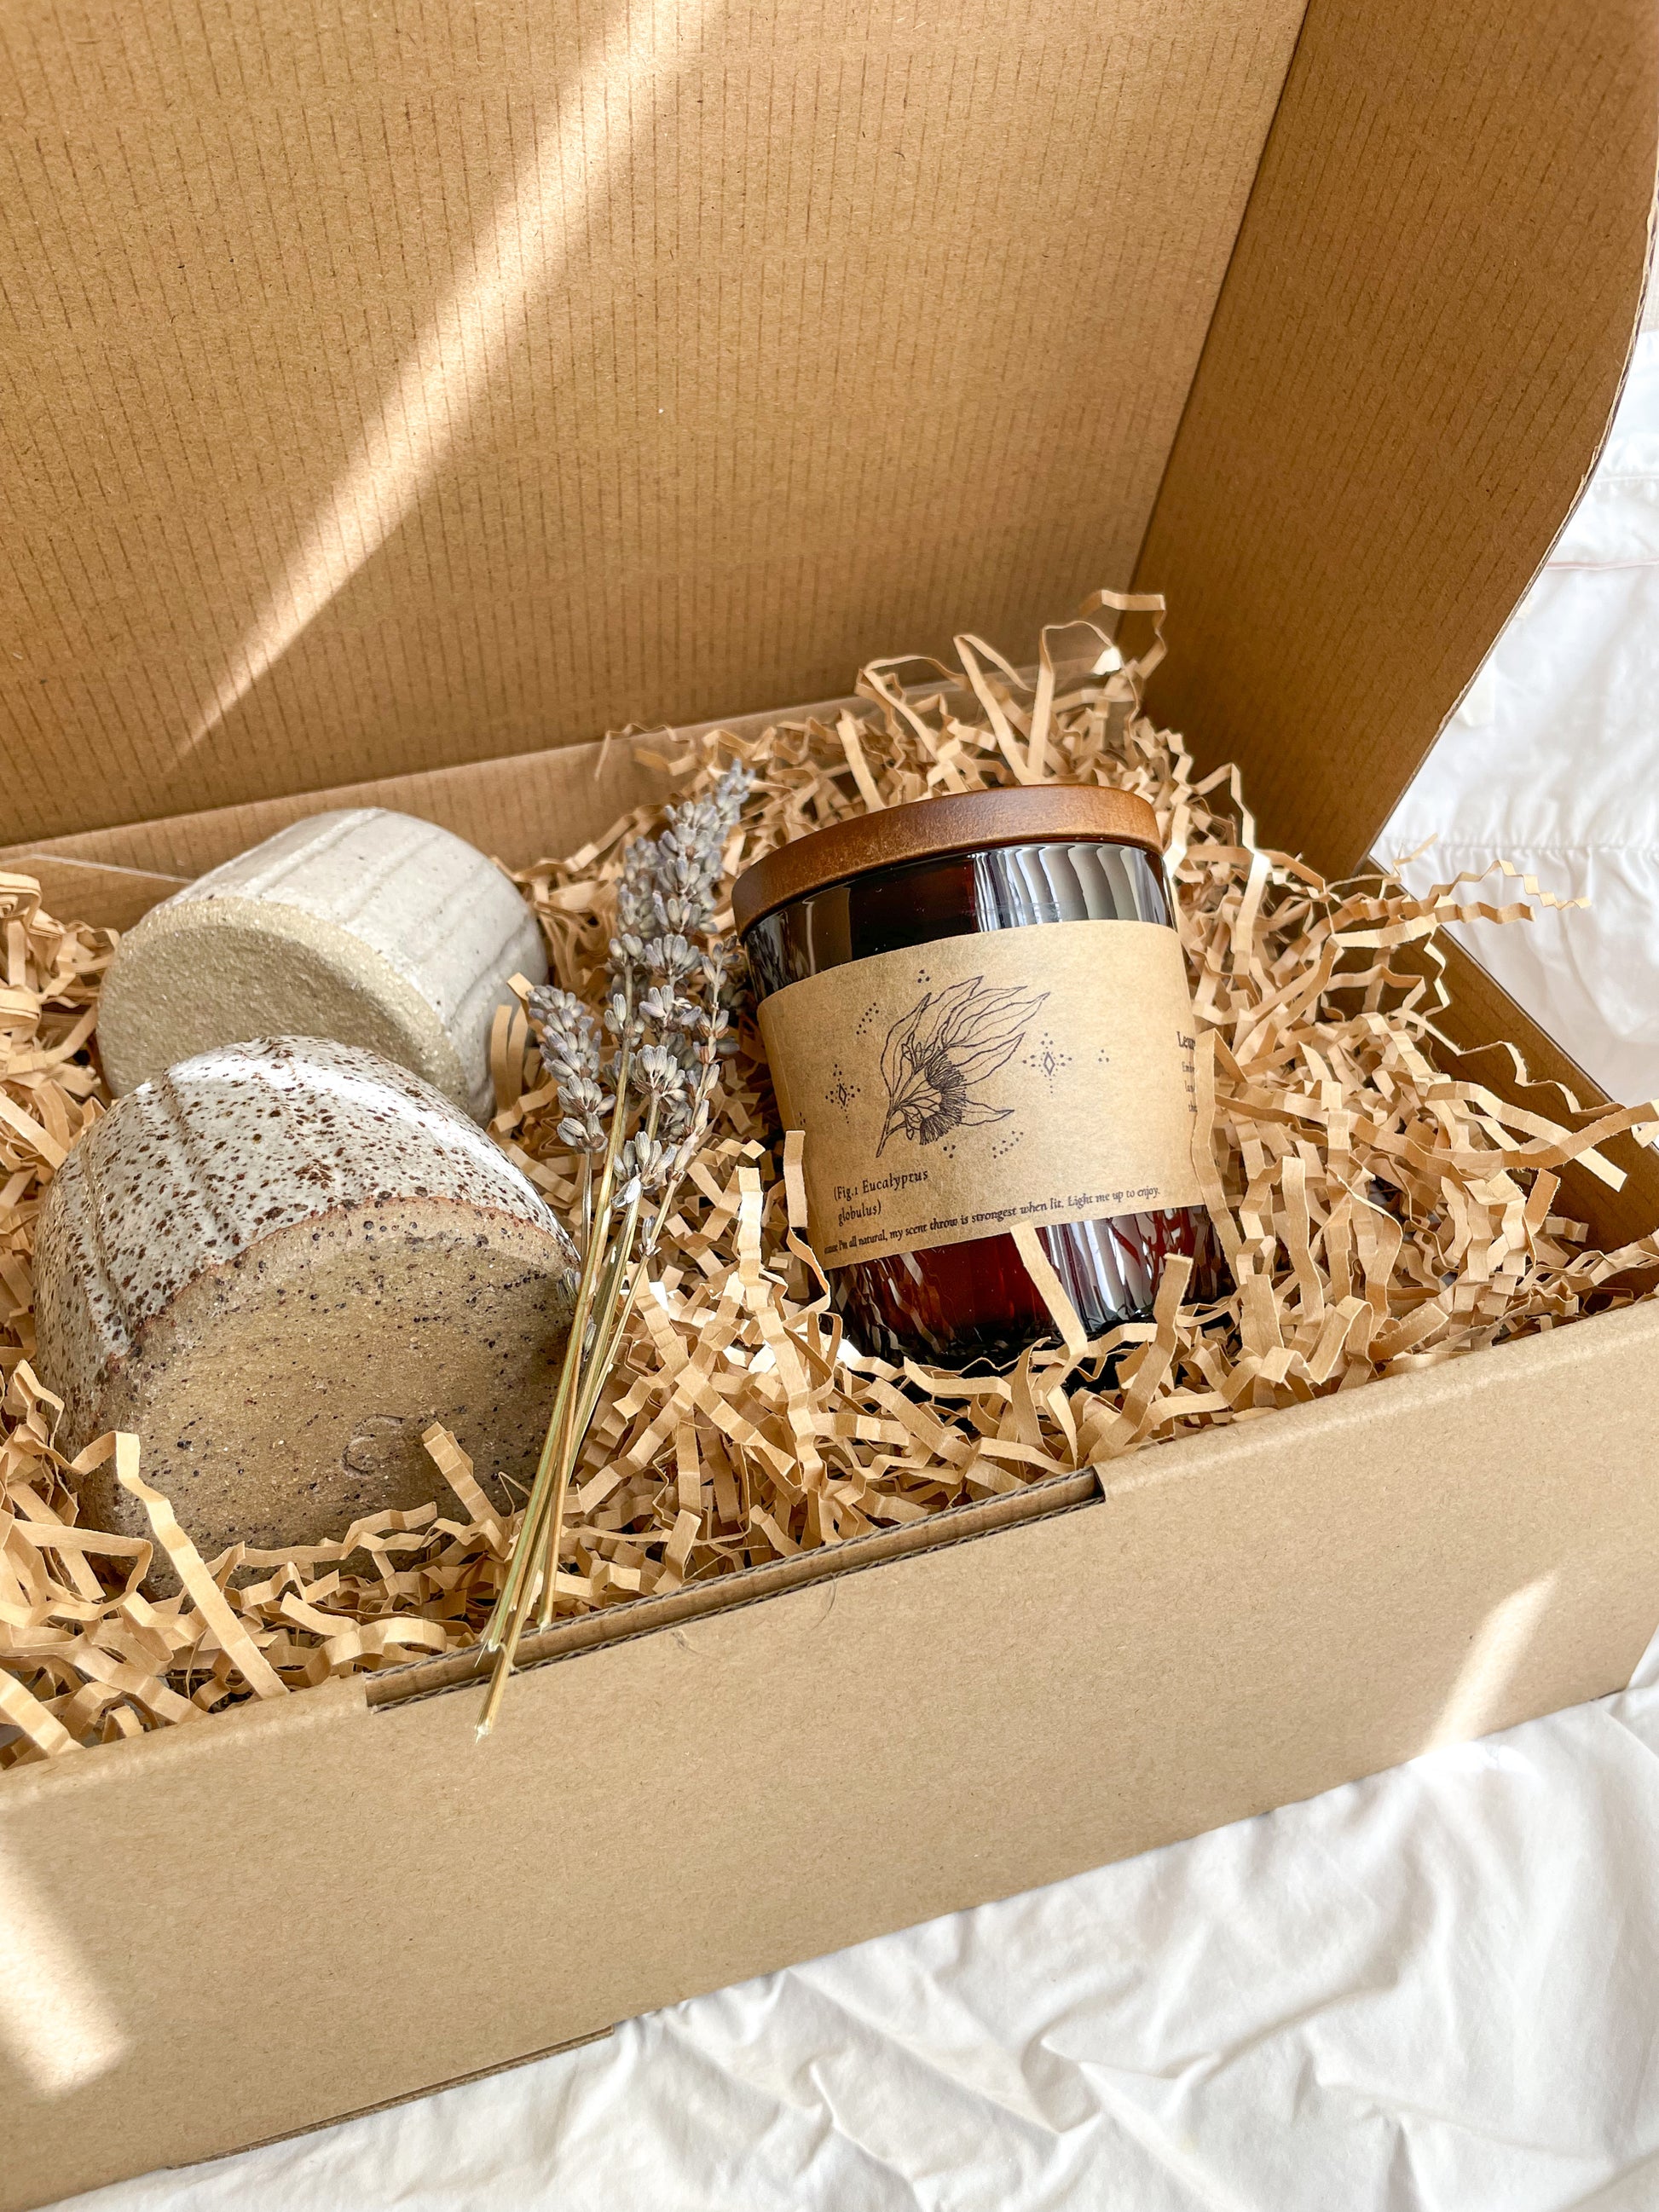 Tranquil gift set which includes two Hazel small handmade ceramic vases and a Leura soywax candle packed in a kraft gift box